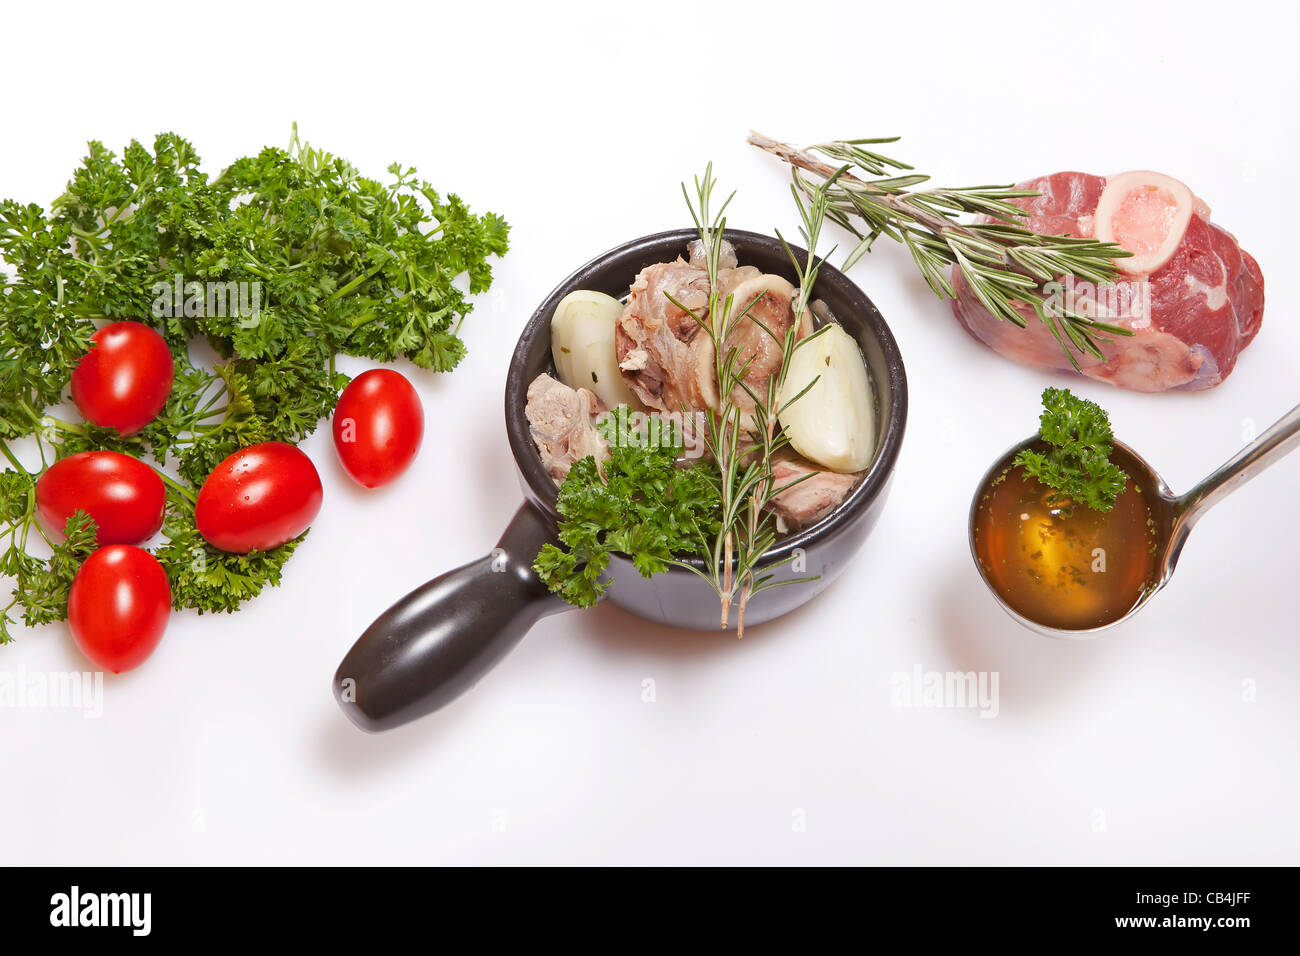 Ingredients for the preparation of a fresh beef broth Stock Photo